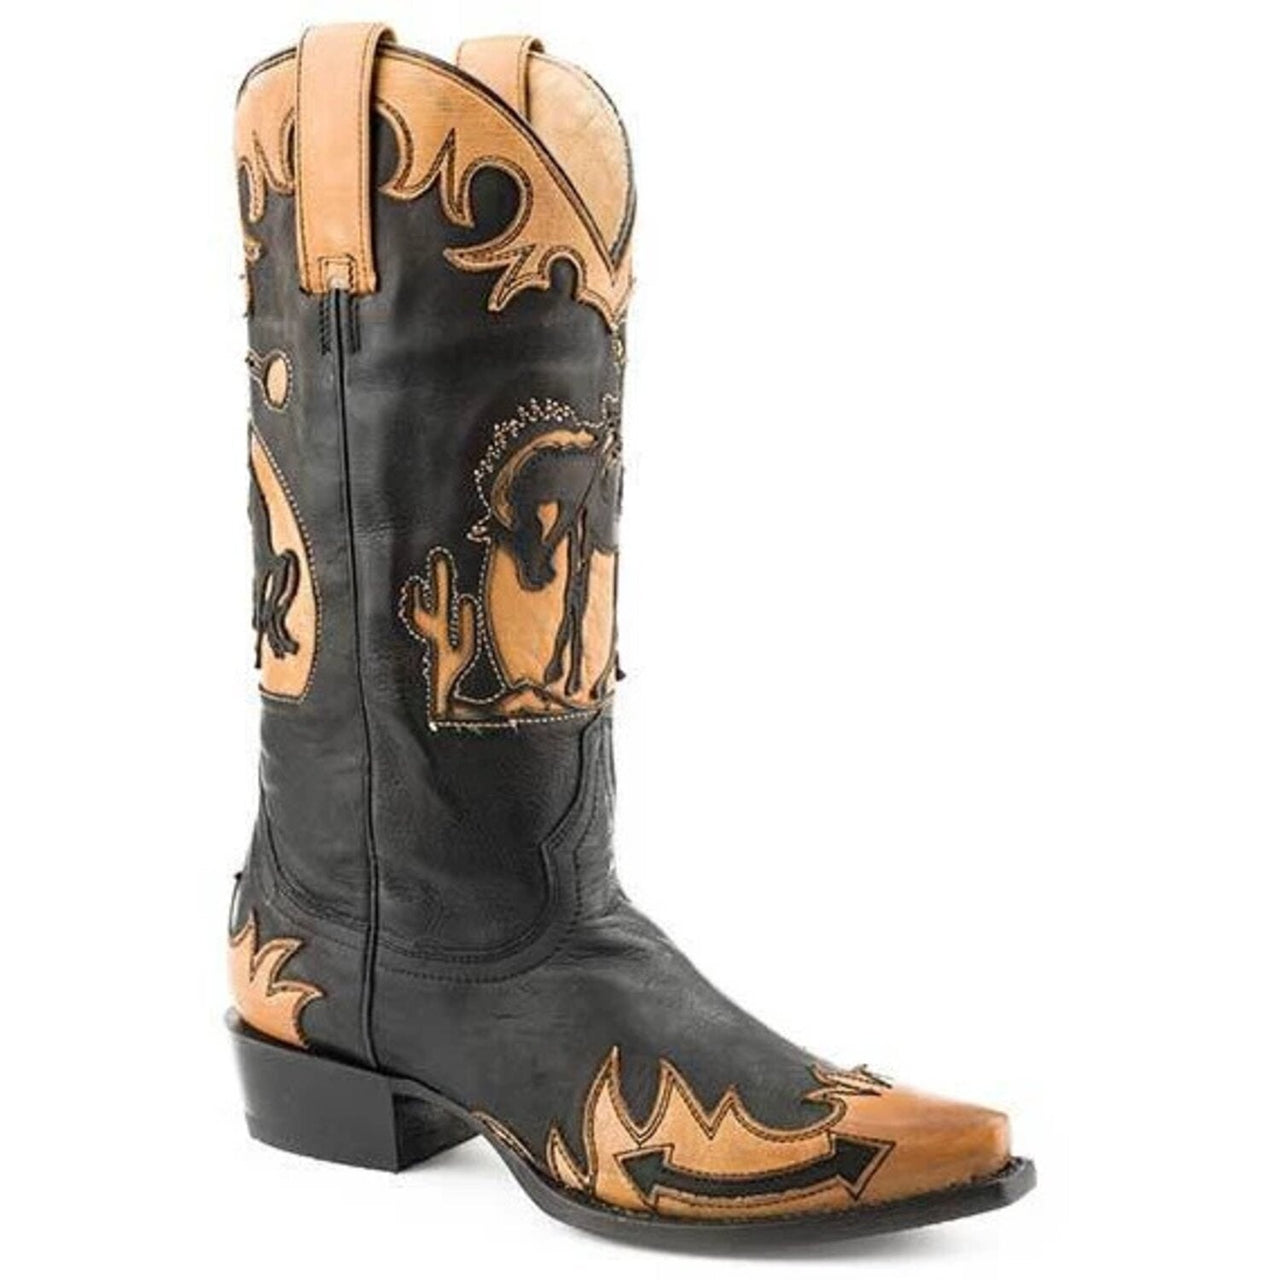 Women's Stetson Faye Leather Boots Handcrafted Black - yeehawcowboy